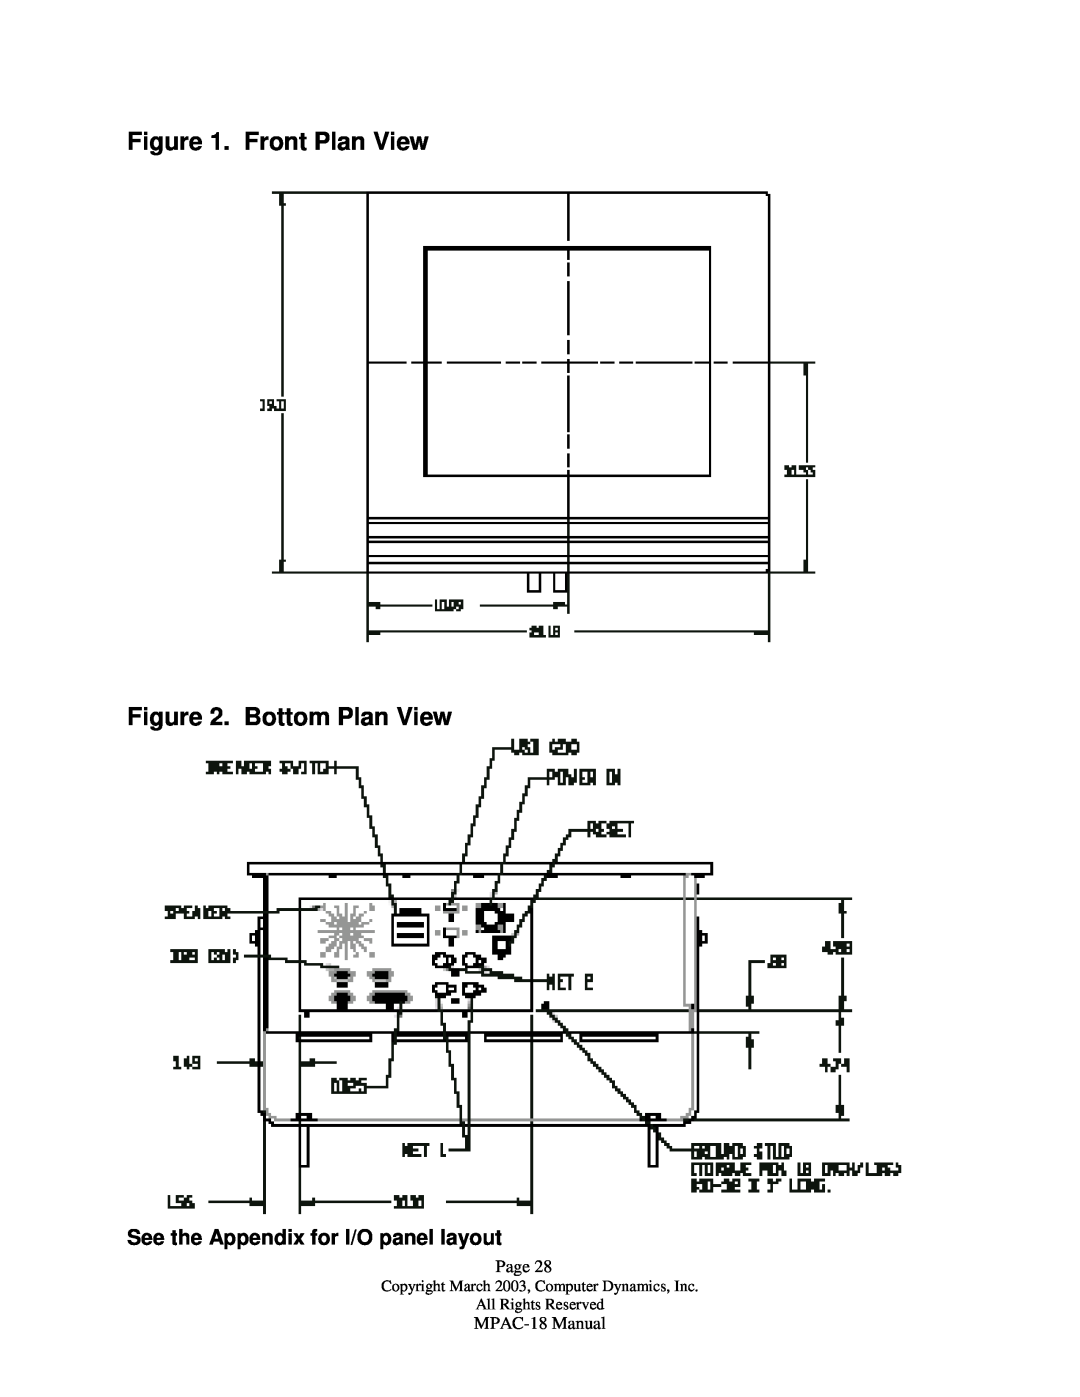 Compaq manual Front Plan View . Bottom Plan View, See the Appendix for I/O panel layout, Page, MPAC-18 Manual 